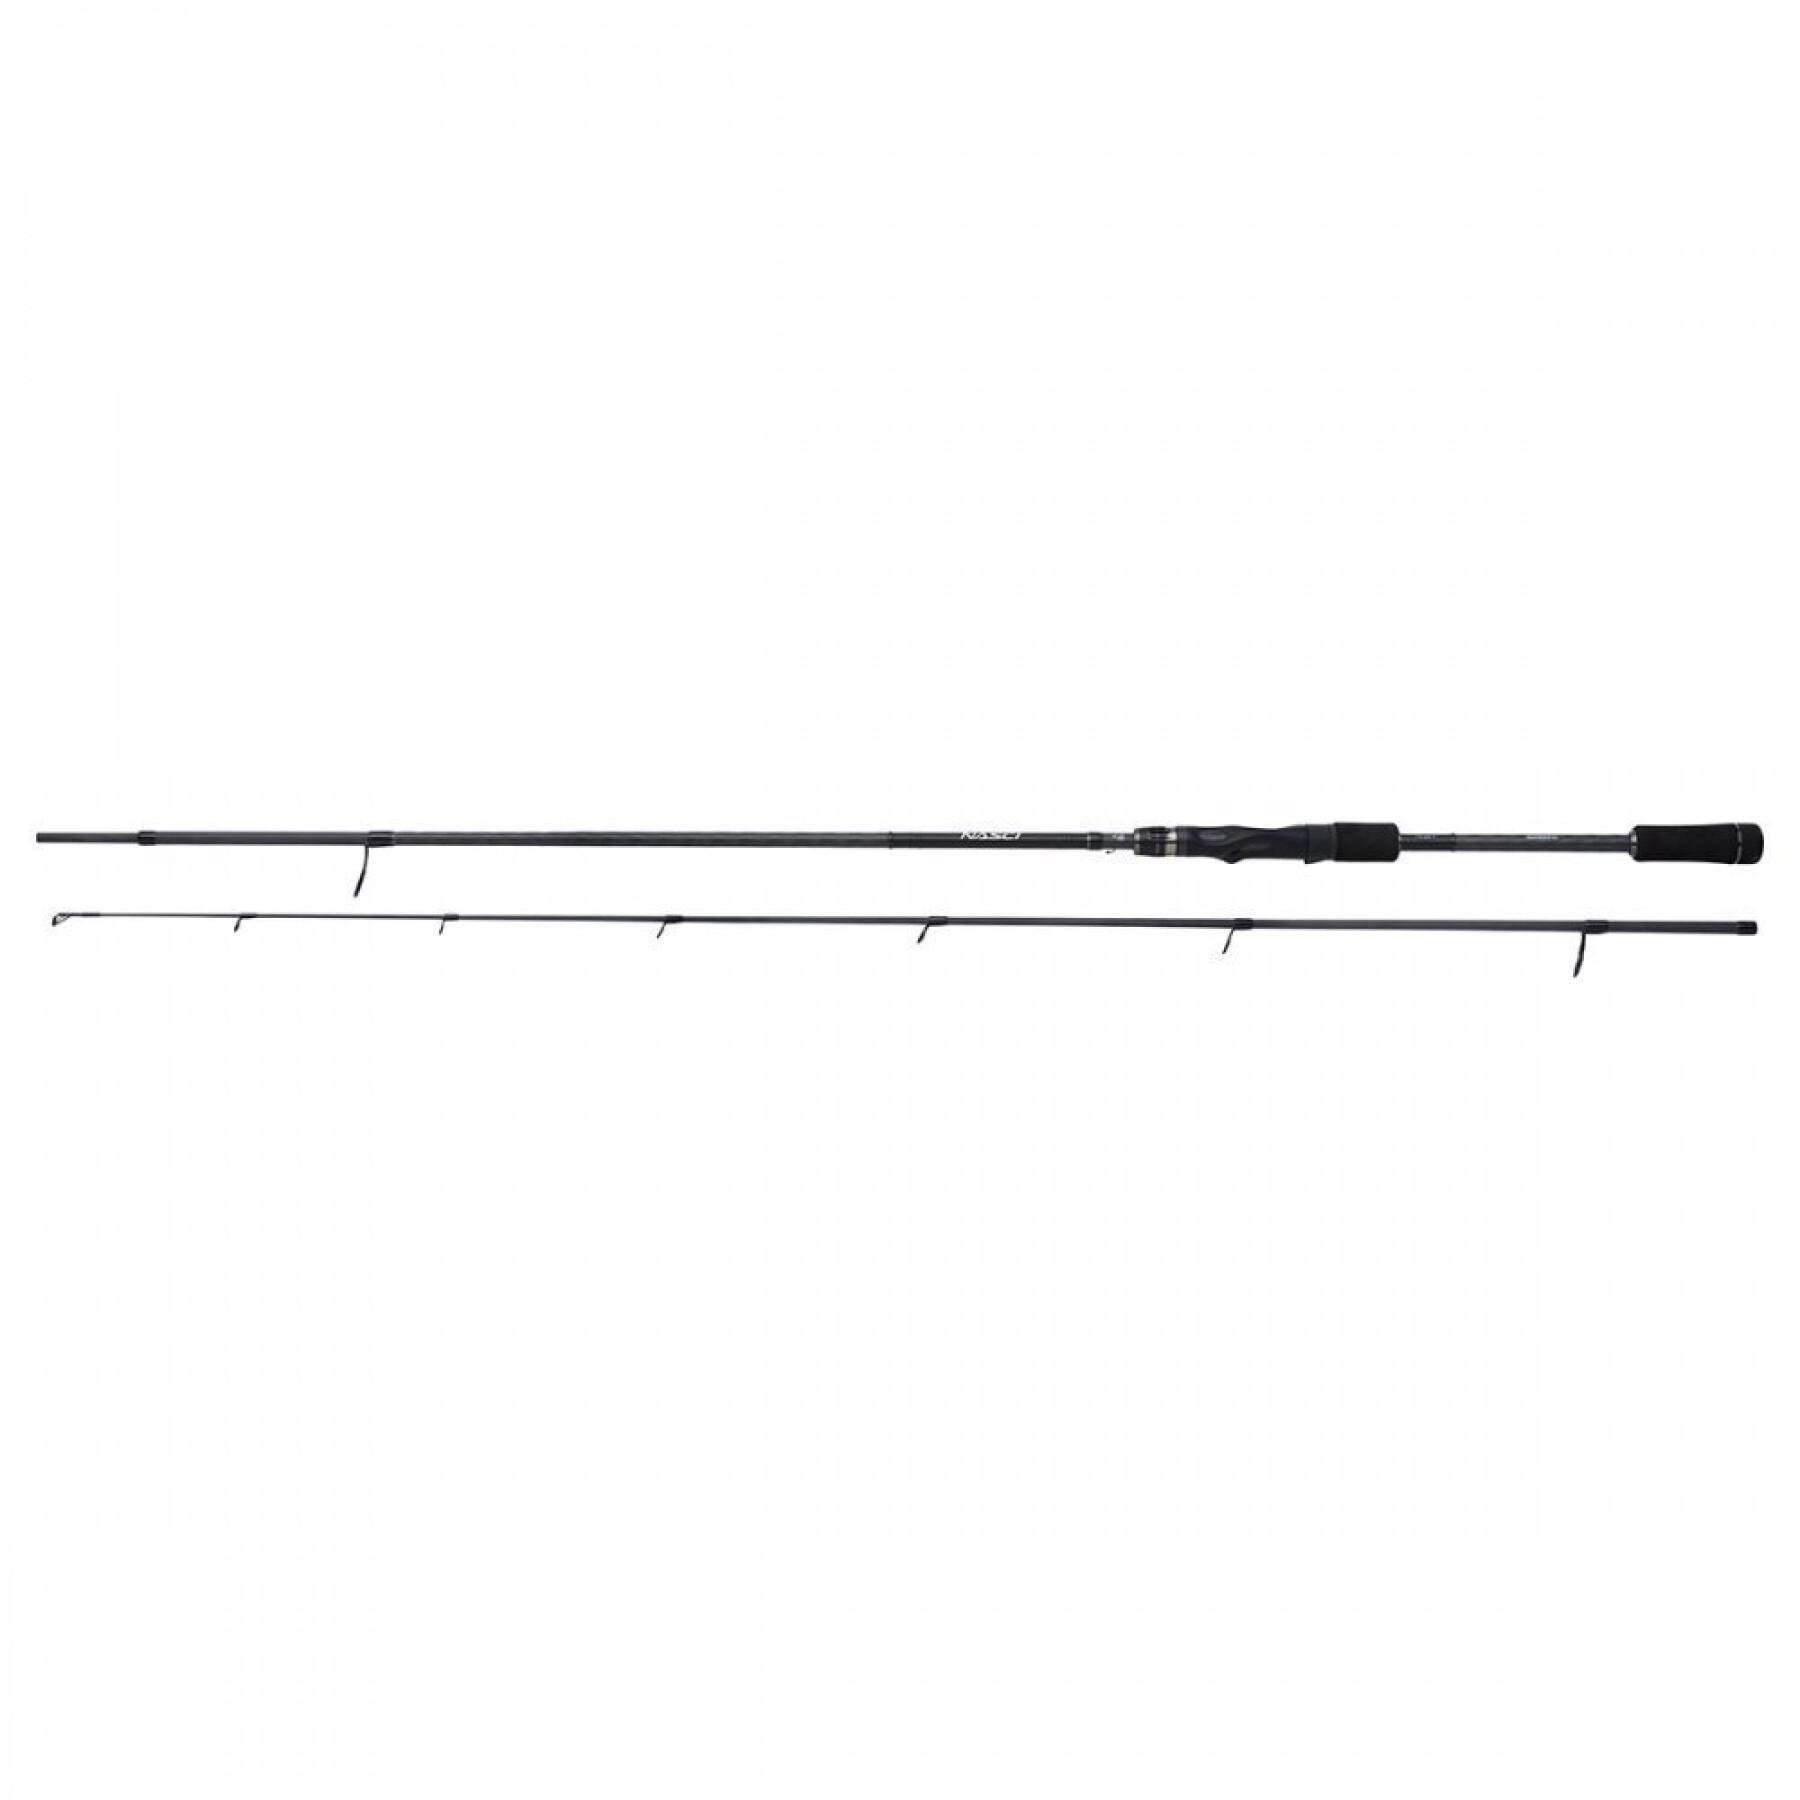 Spinning rods Shimano Nasci Fast